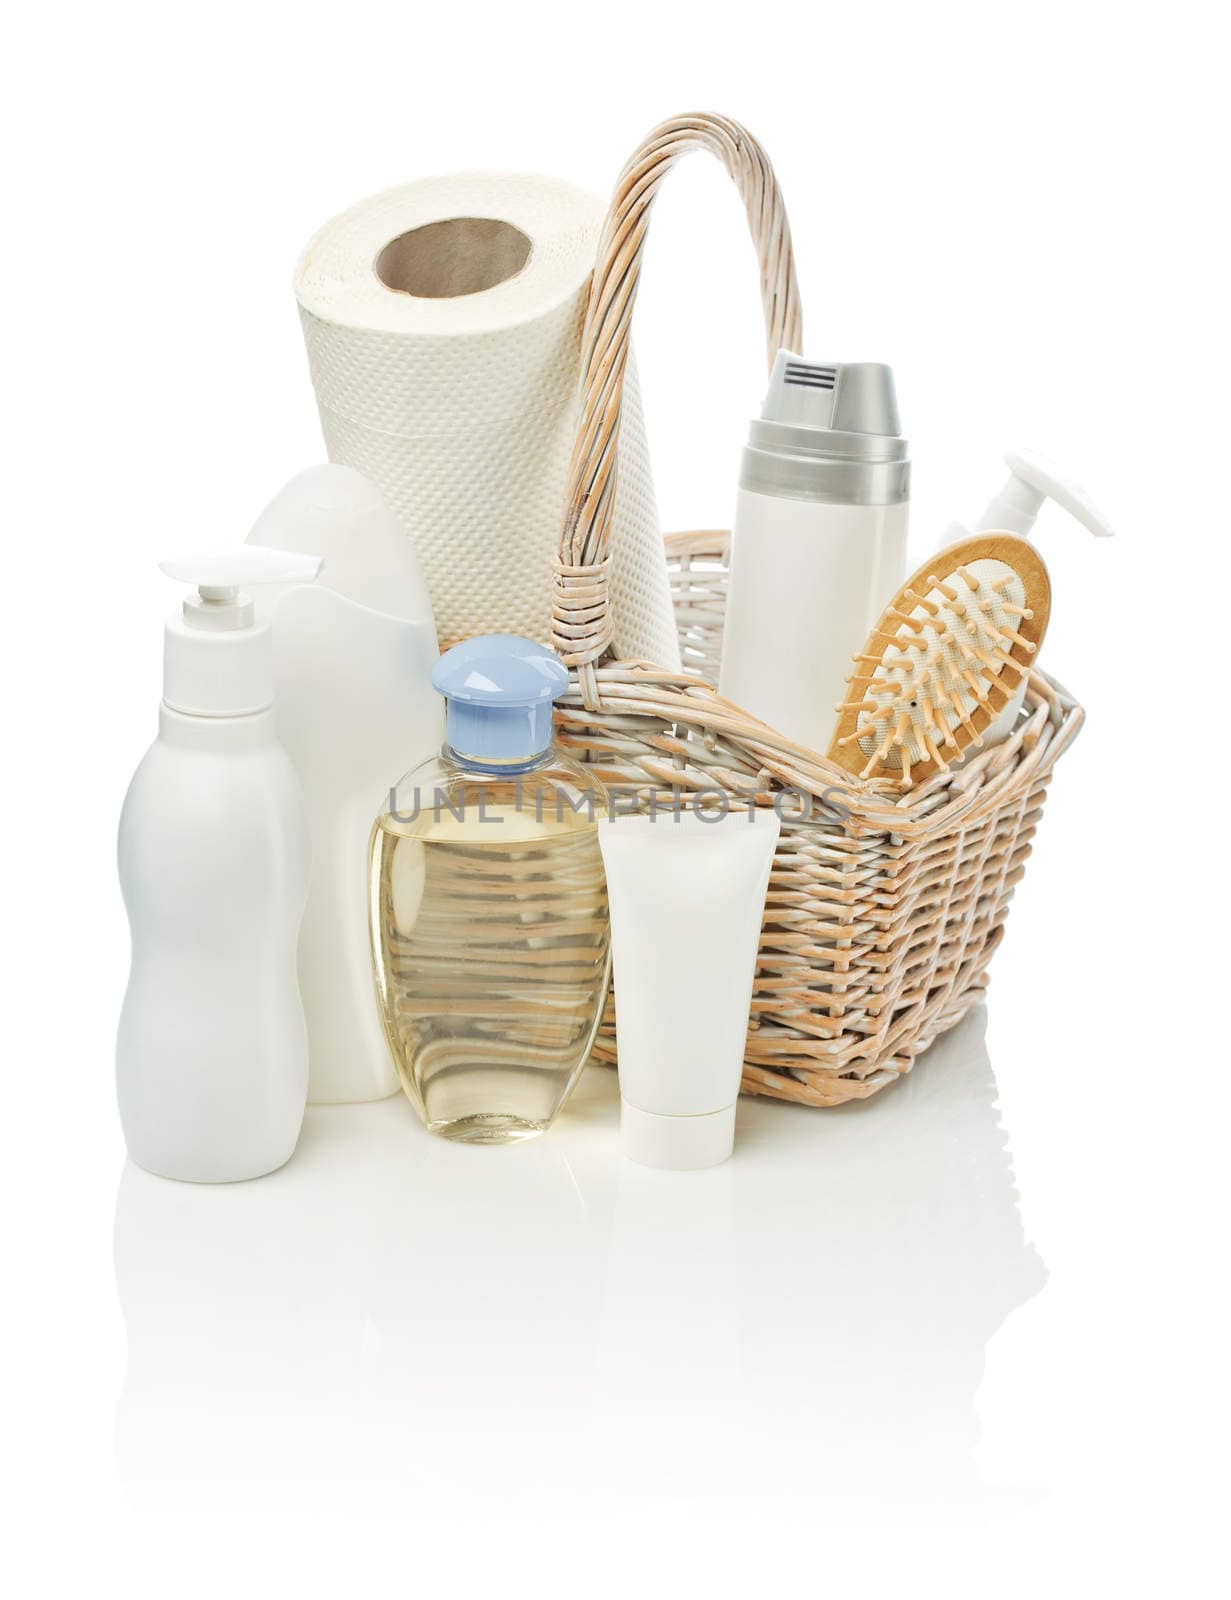 cosmetical items in basket